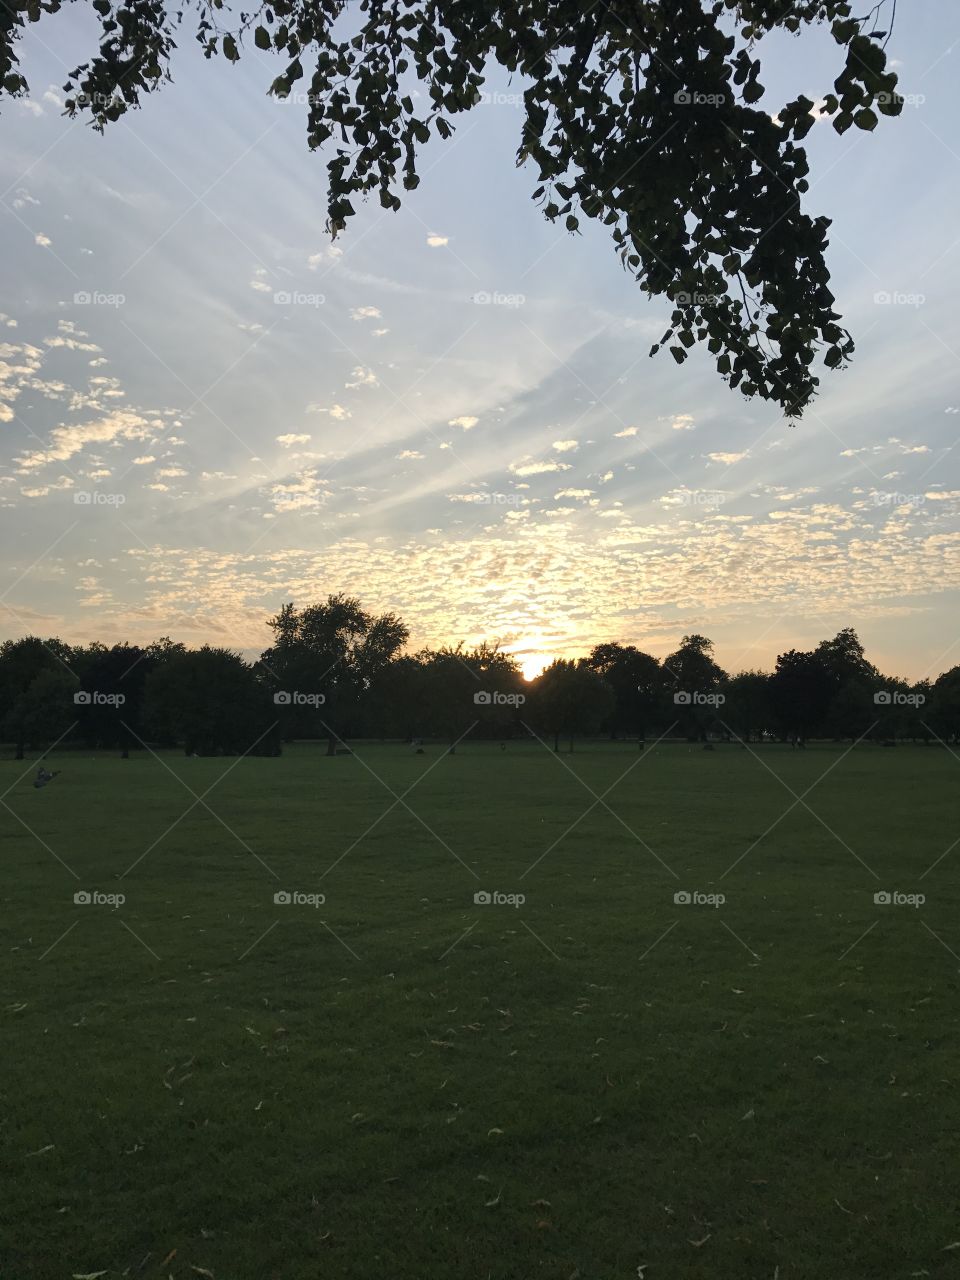 Sunset at the park